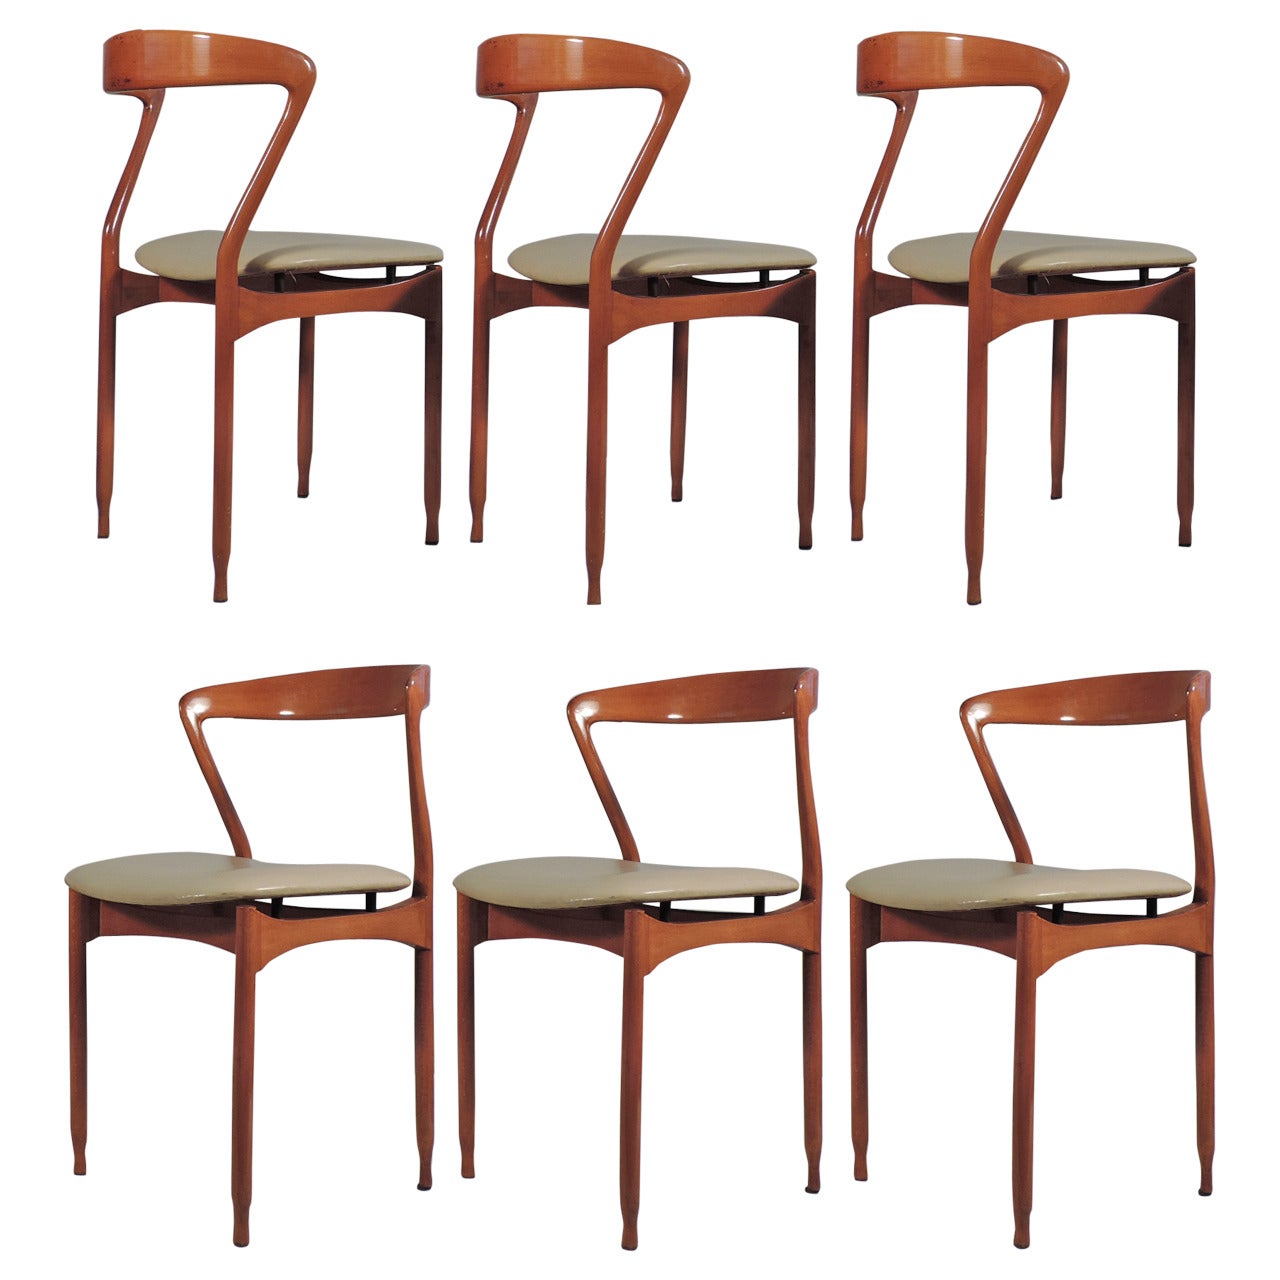 Splendid Set of Six Surreal Dining Chairs